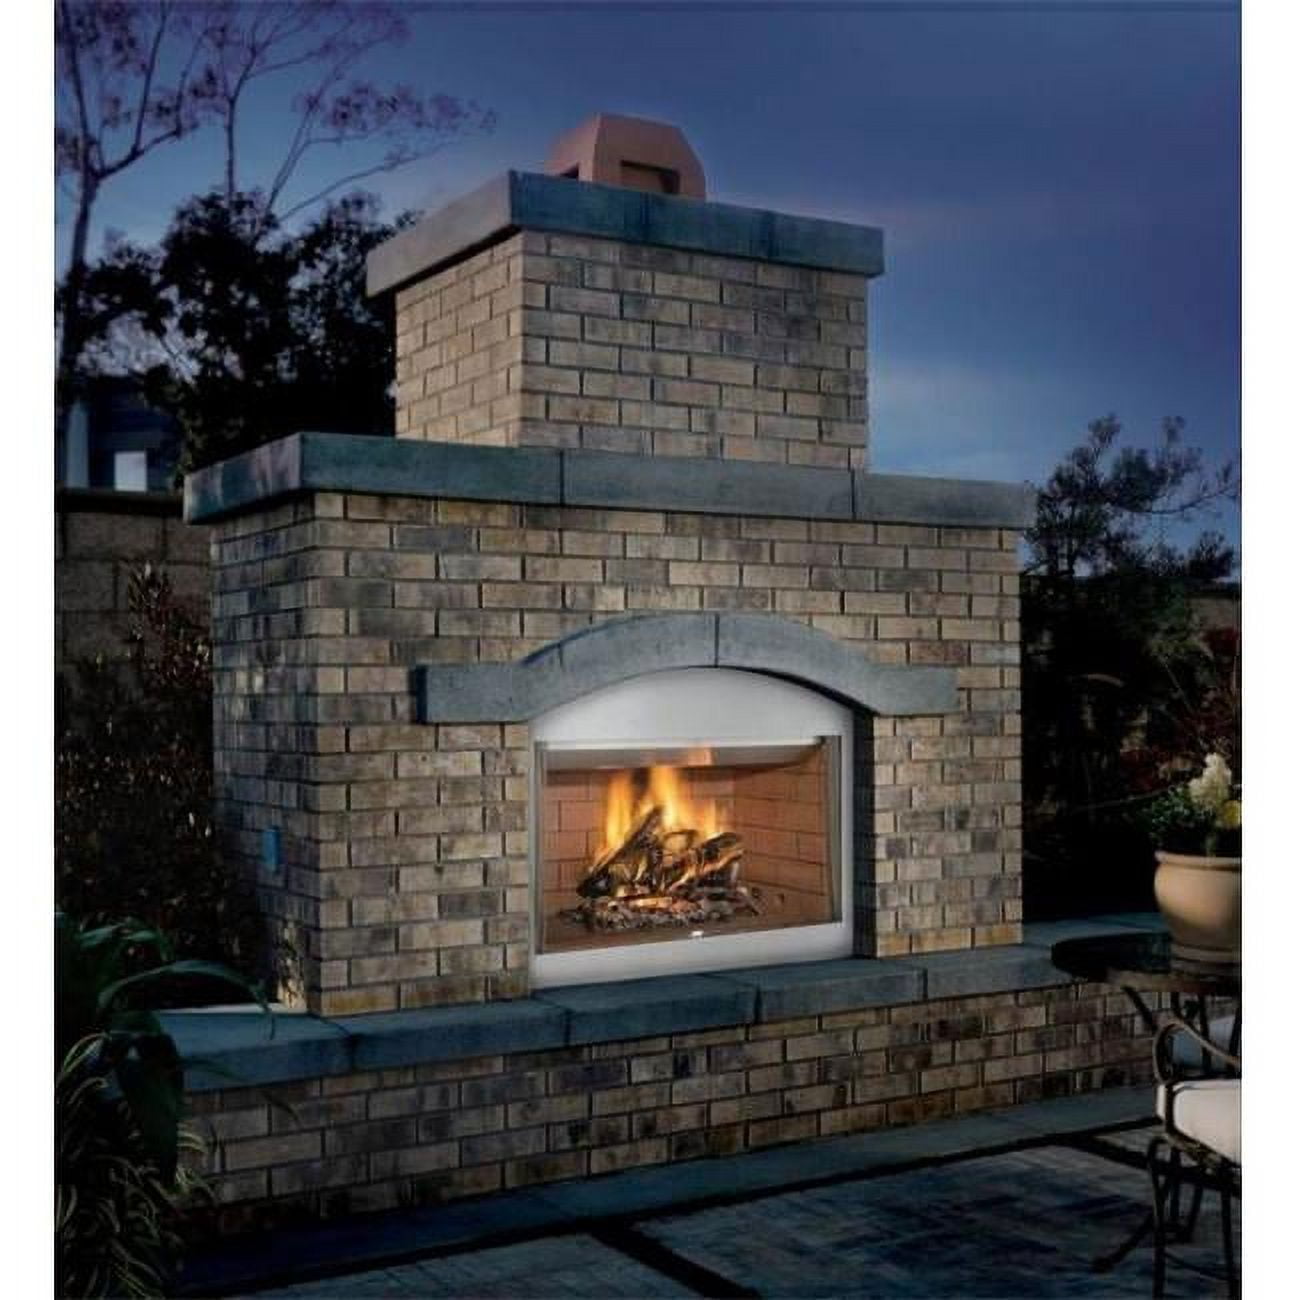 Designs-Done-Right S36 Vantage Hearth Laredo Outdoor Wood Fireplace - White Stacked Brick Liner